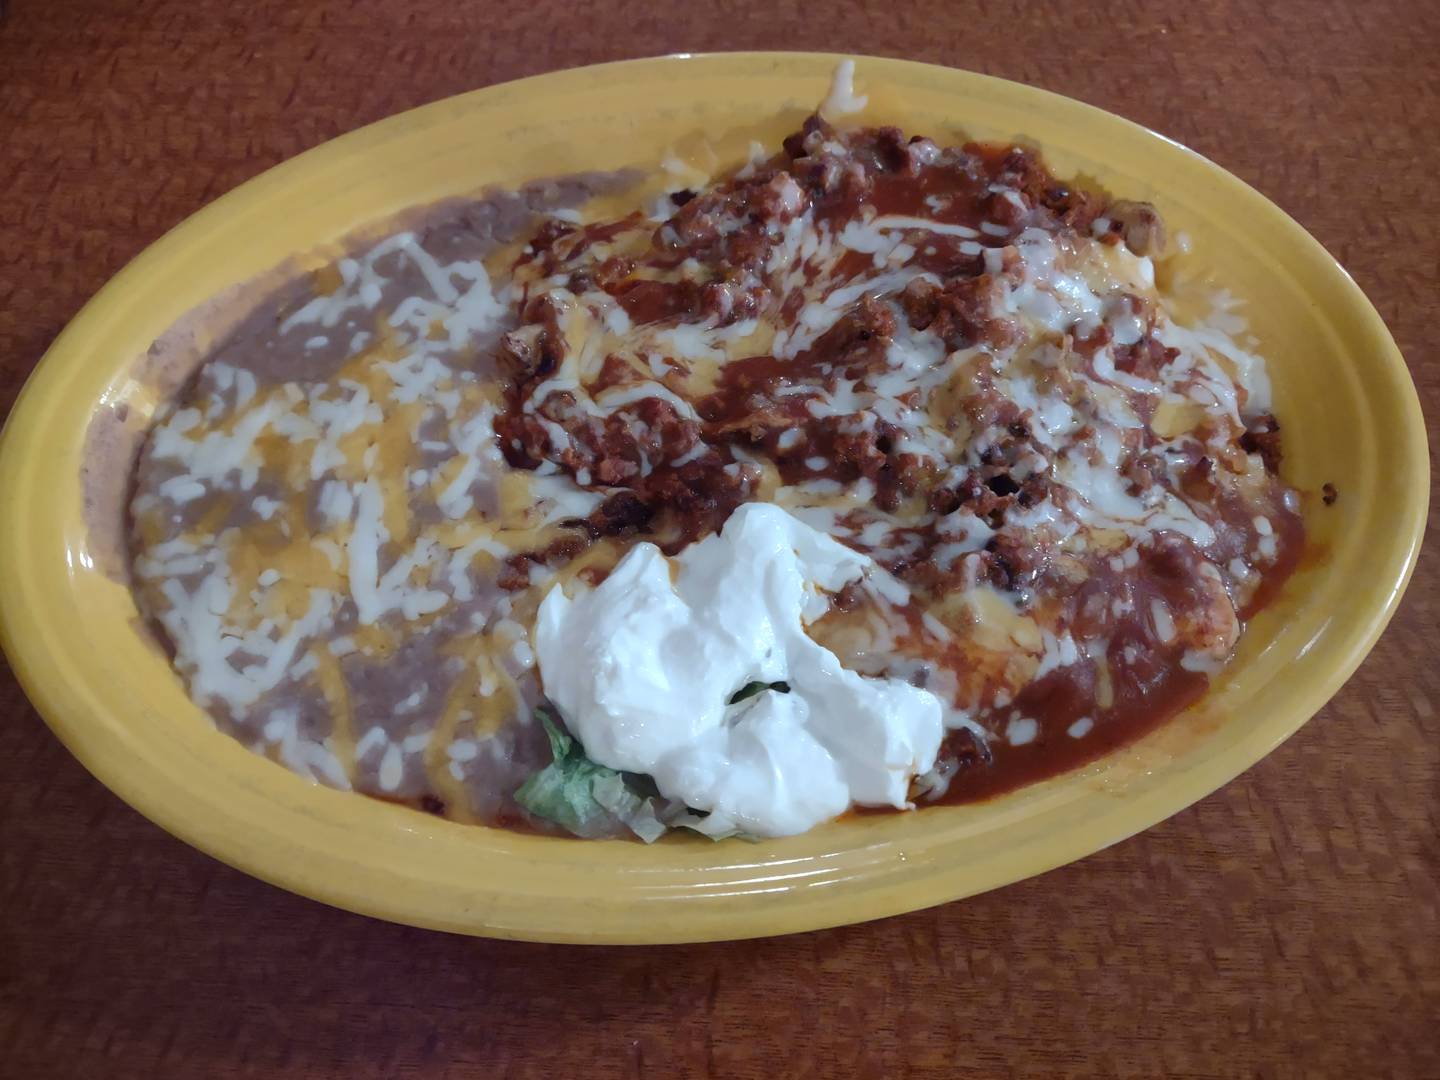 Chori pollo at Mr. Salsas featured a chicken breast in salsa ranchero with chorizo and cheese, served with refried beans, rice and sour cream.